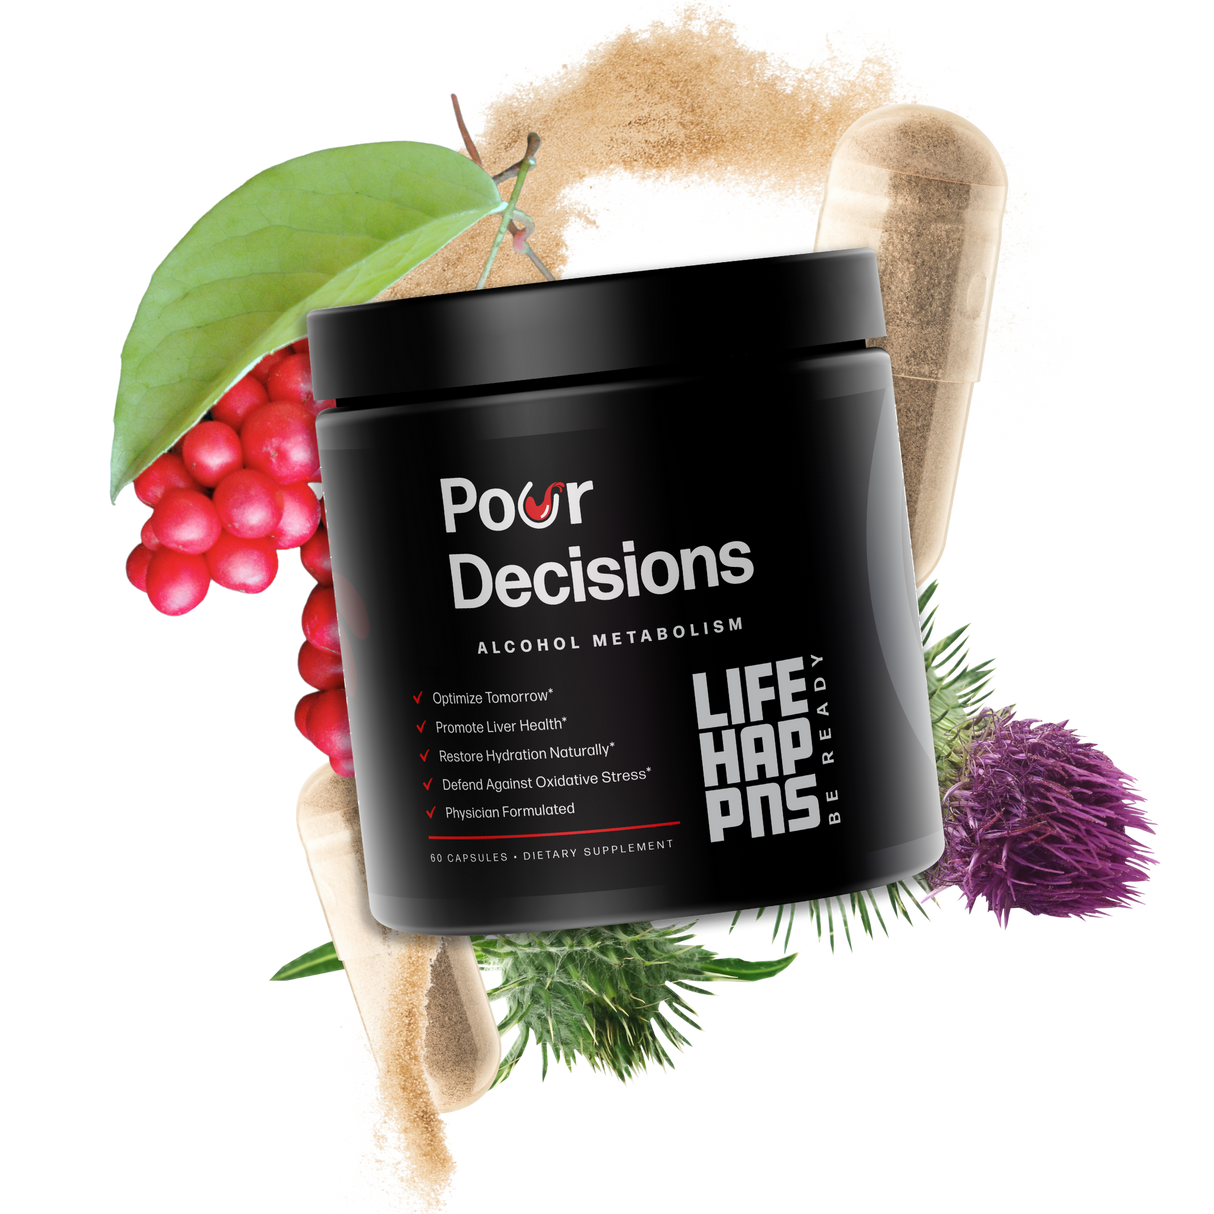 Life Happns Pour Decisions Alcohol Metabolism Supplement with Milk Thistle, Schisandra, and Capsule